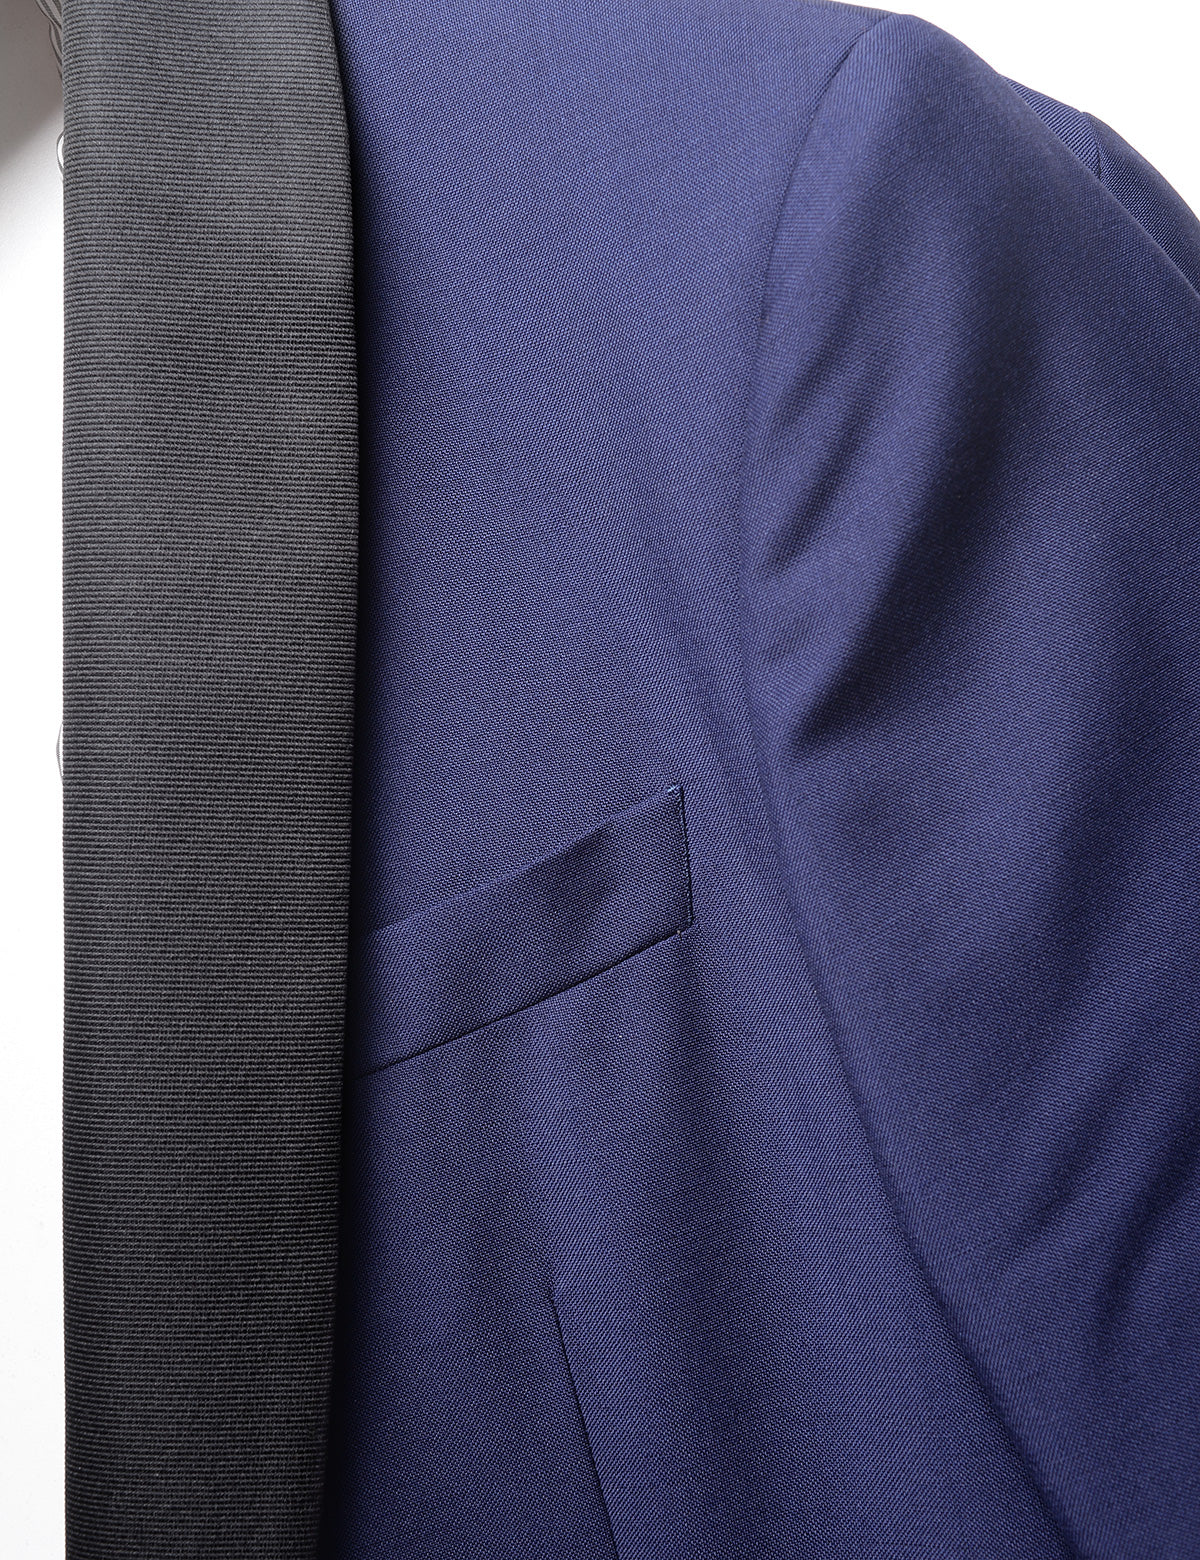 Detail shot of Brooklyn Tailors BKT50 Shawl Collar Tuxedo Jacket in Wool / Mohair - Ink Blue with Grosgrain Lapel showing grosgrain lapel, pocket, and fabric texture